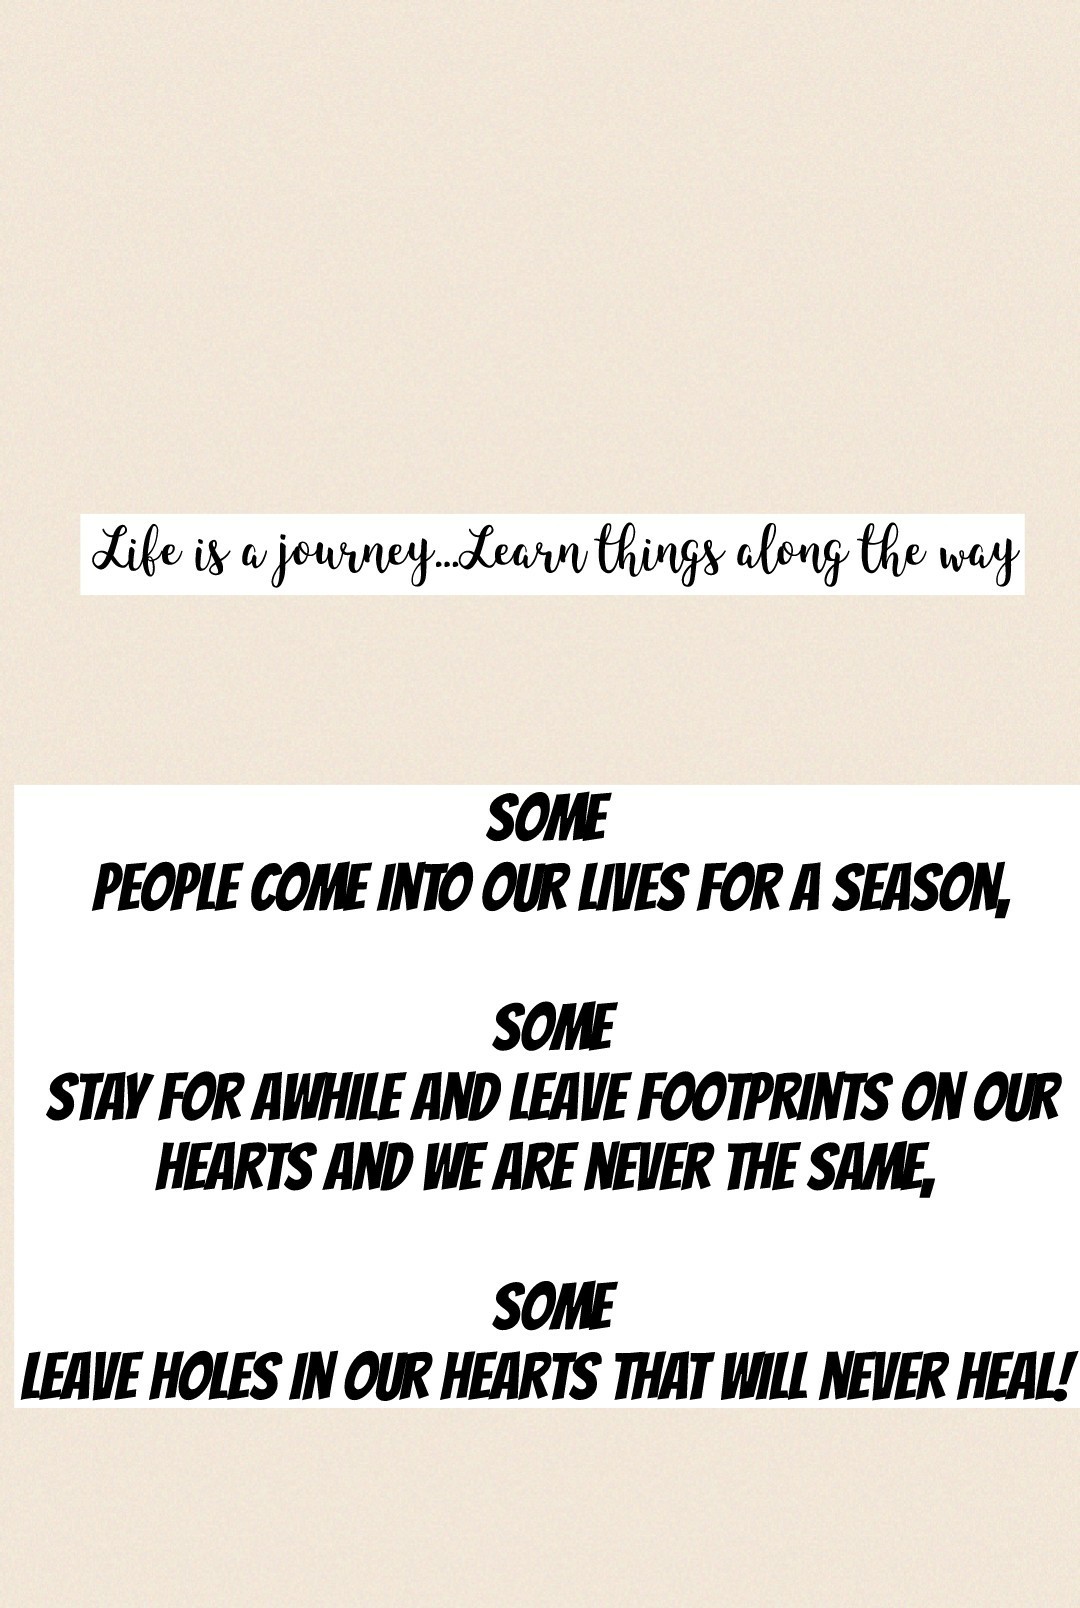 Some 
people come into our lives for a season,

some
stay for awhile and leave footprints on our
hearts and we are never the same, 

some
leave holes in our hearts that will never heal! 